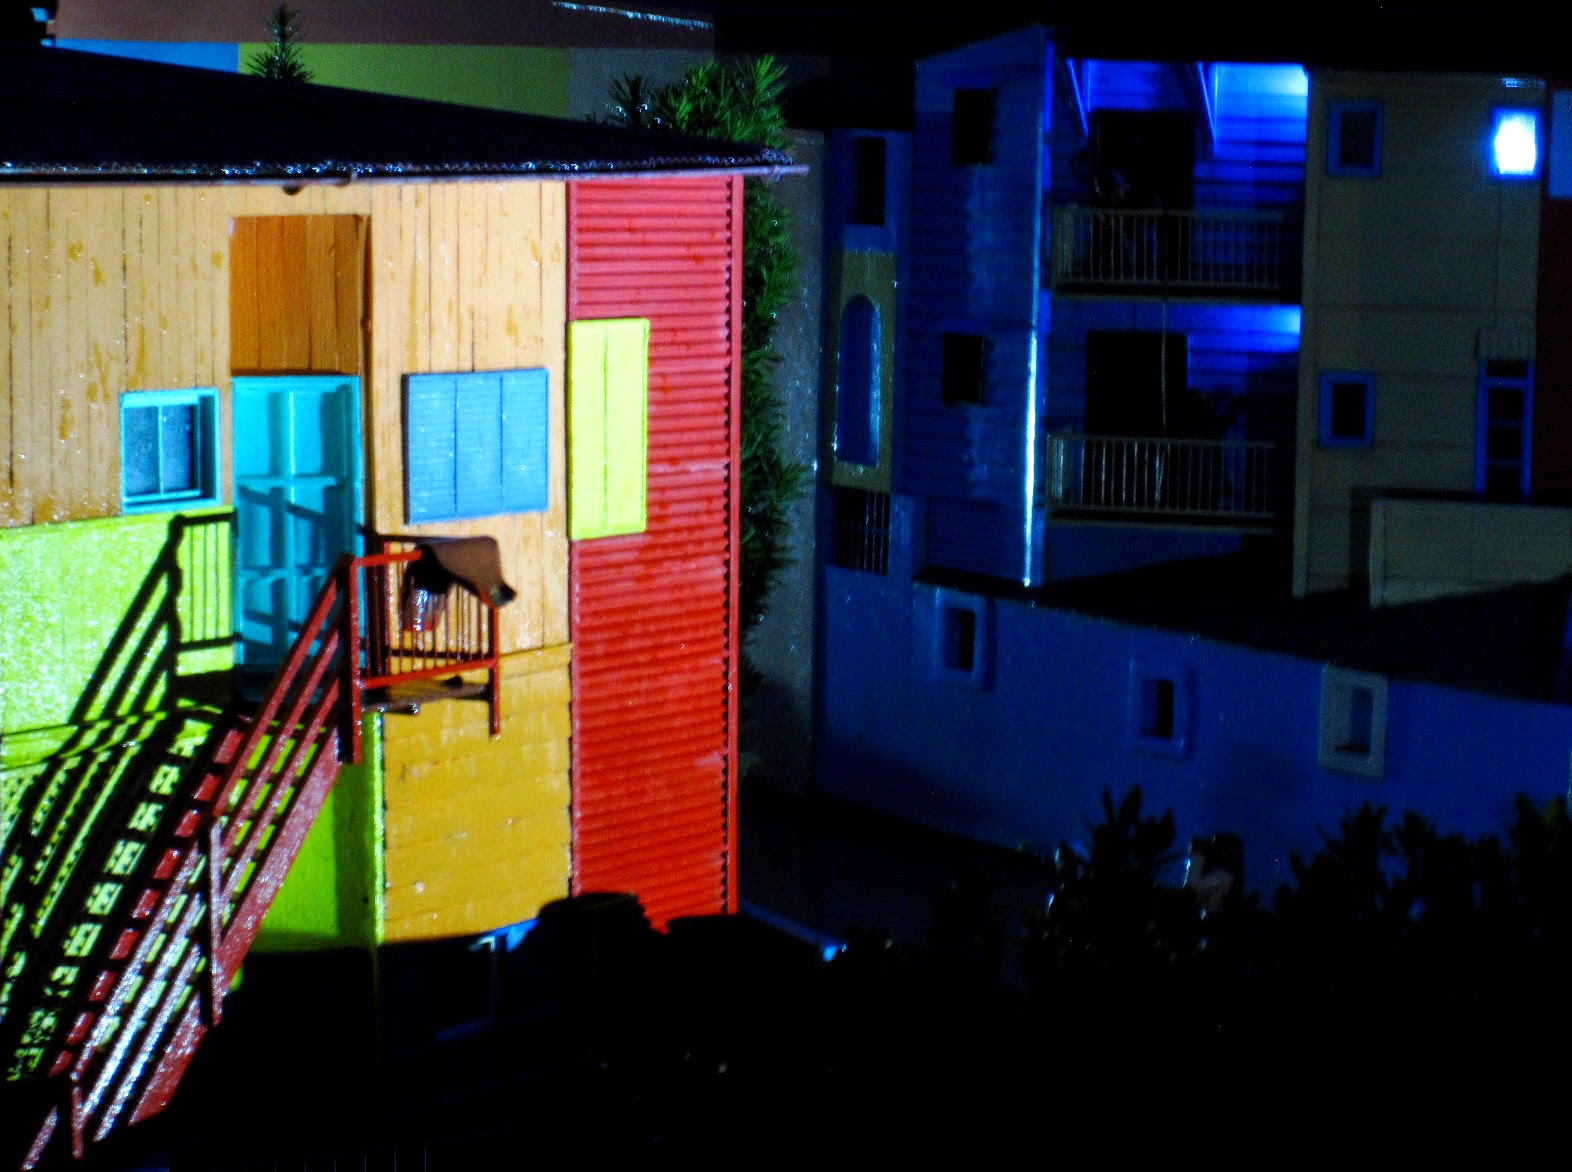 Miniature model of colourfull apartment buildings at night.